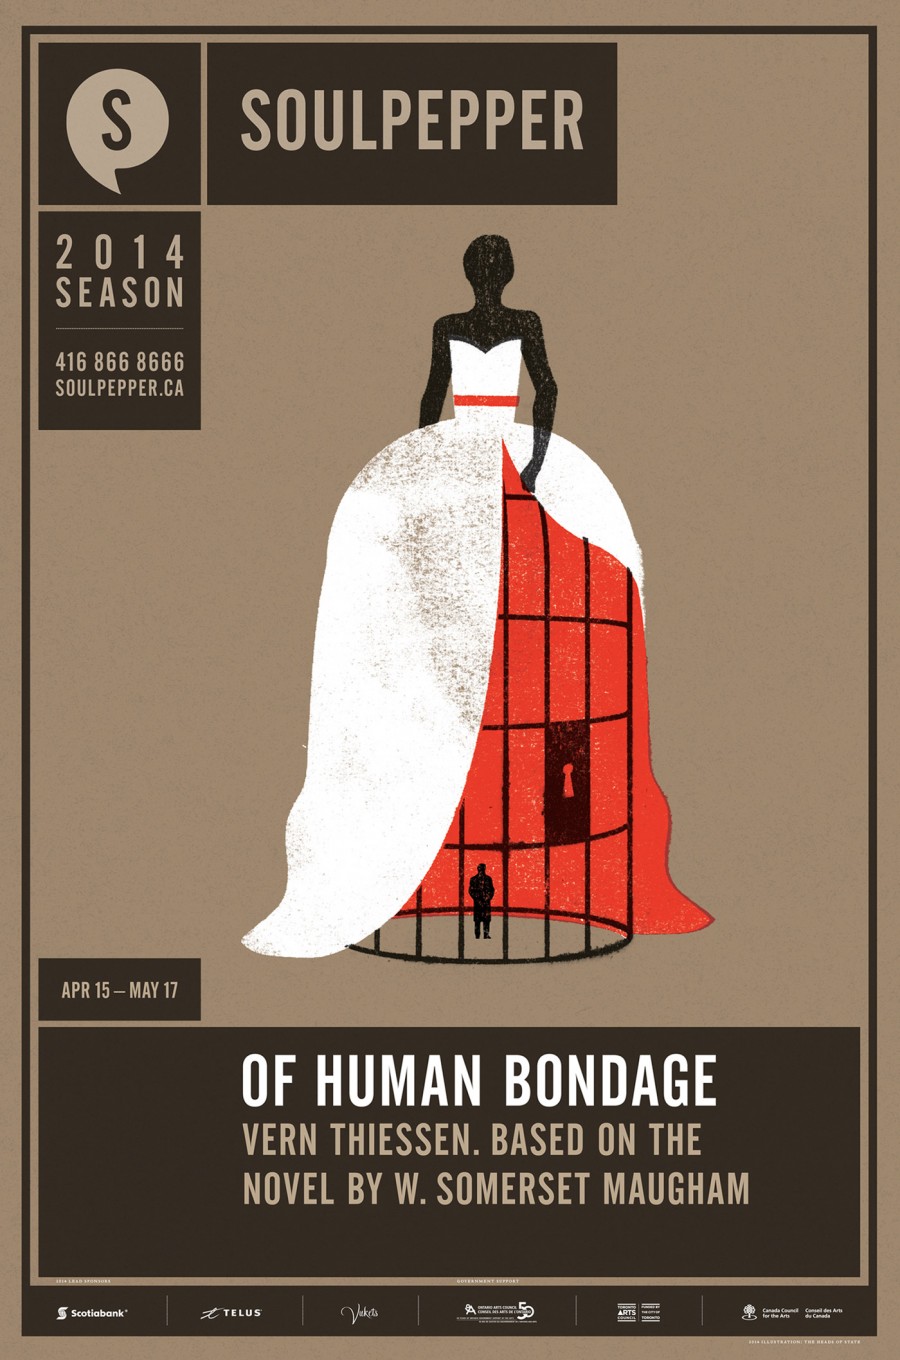 Of Human Bondage - Soulpepper Theatre - 2014 Season Poster Series - The Heads of State